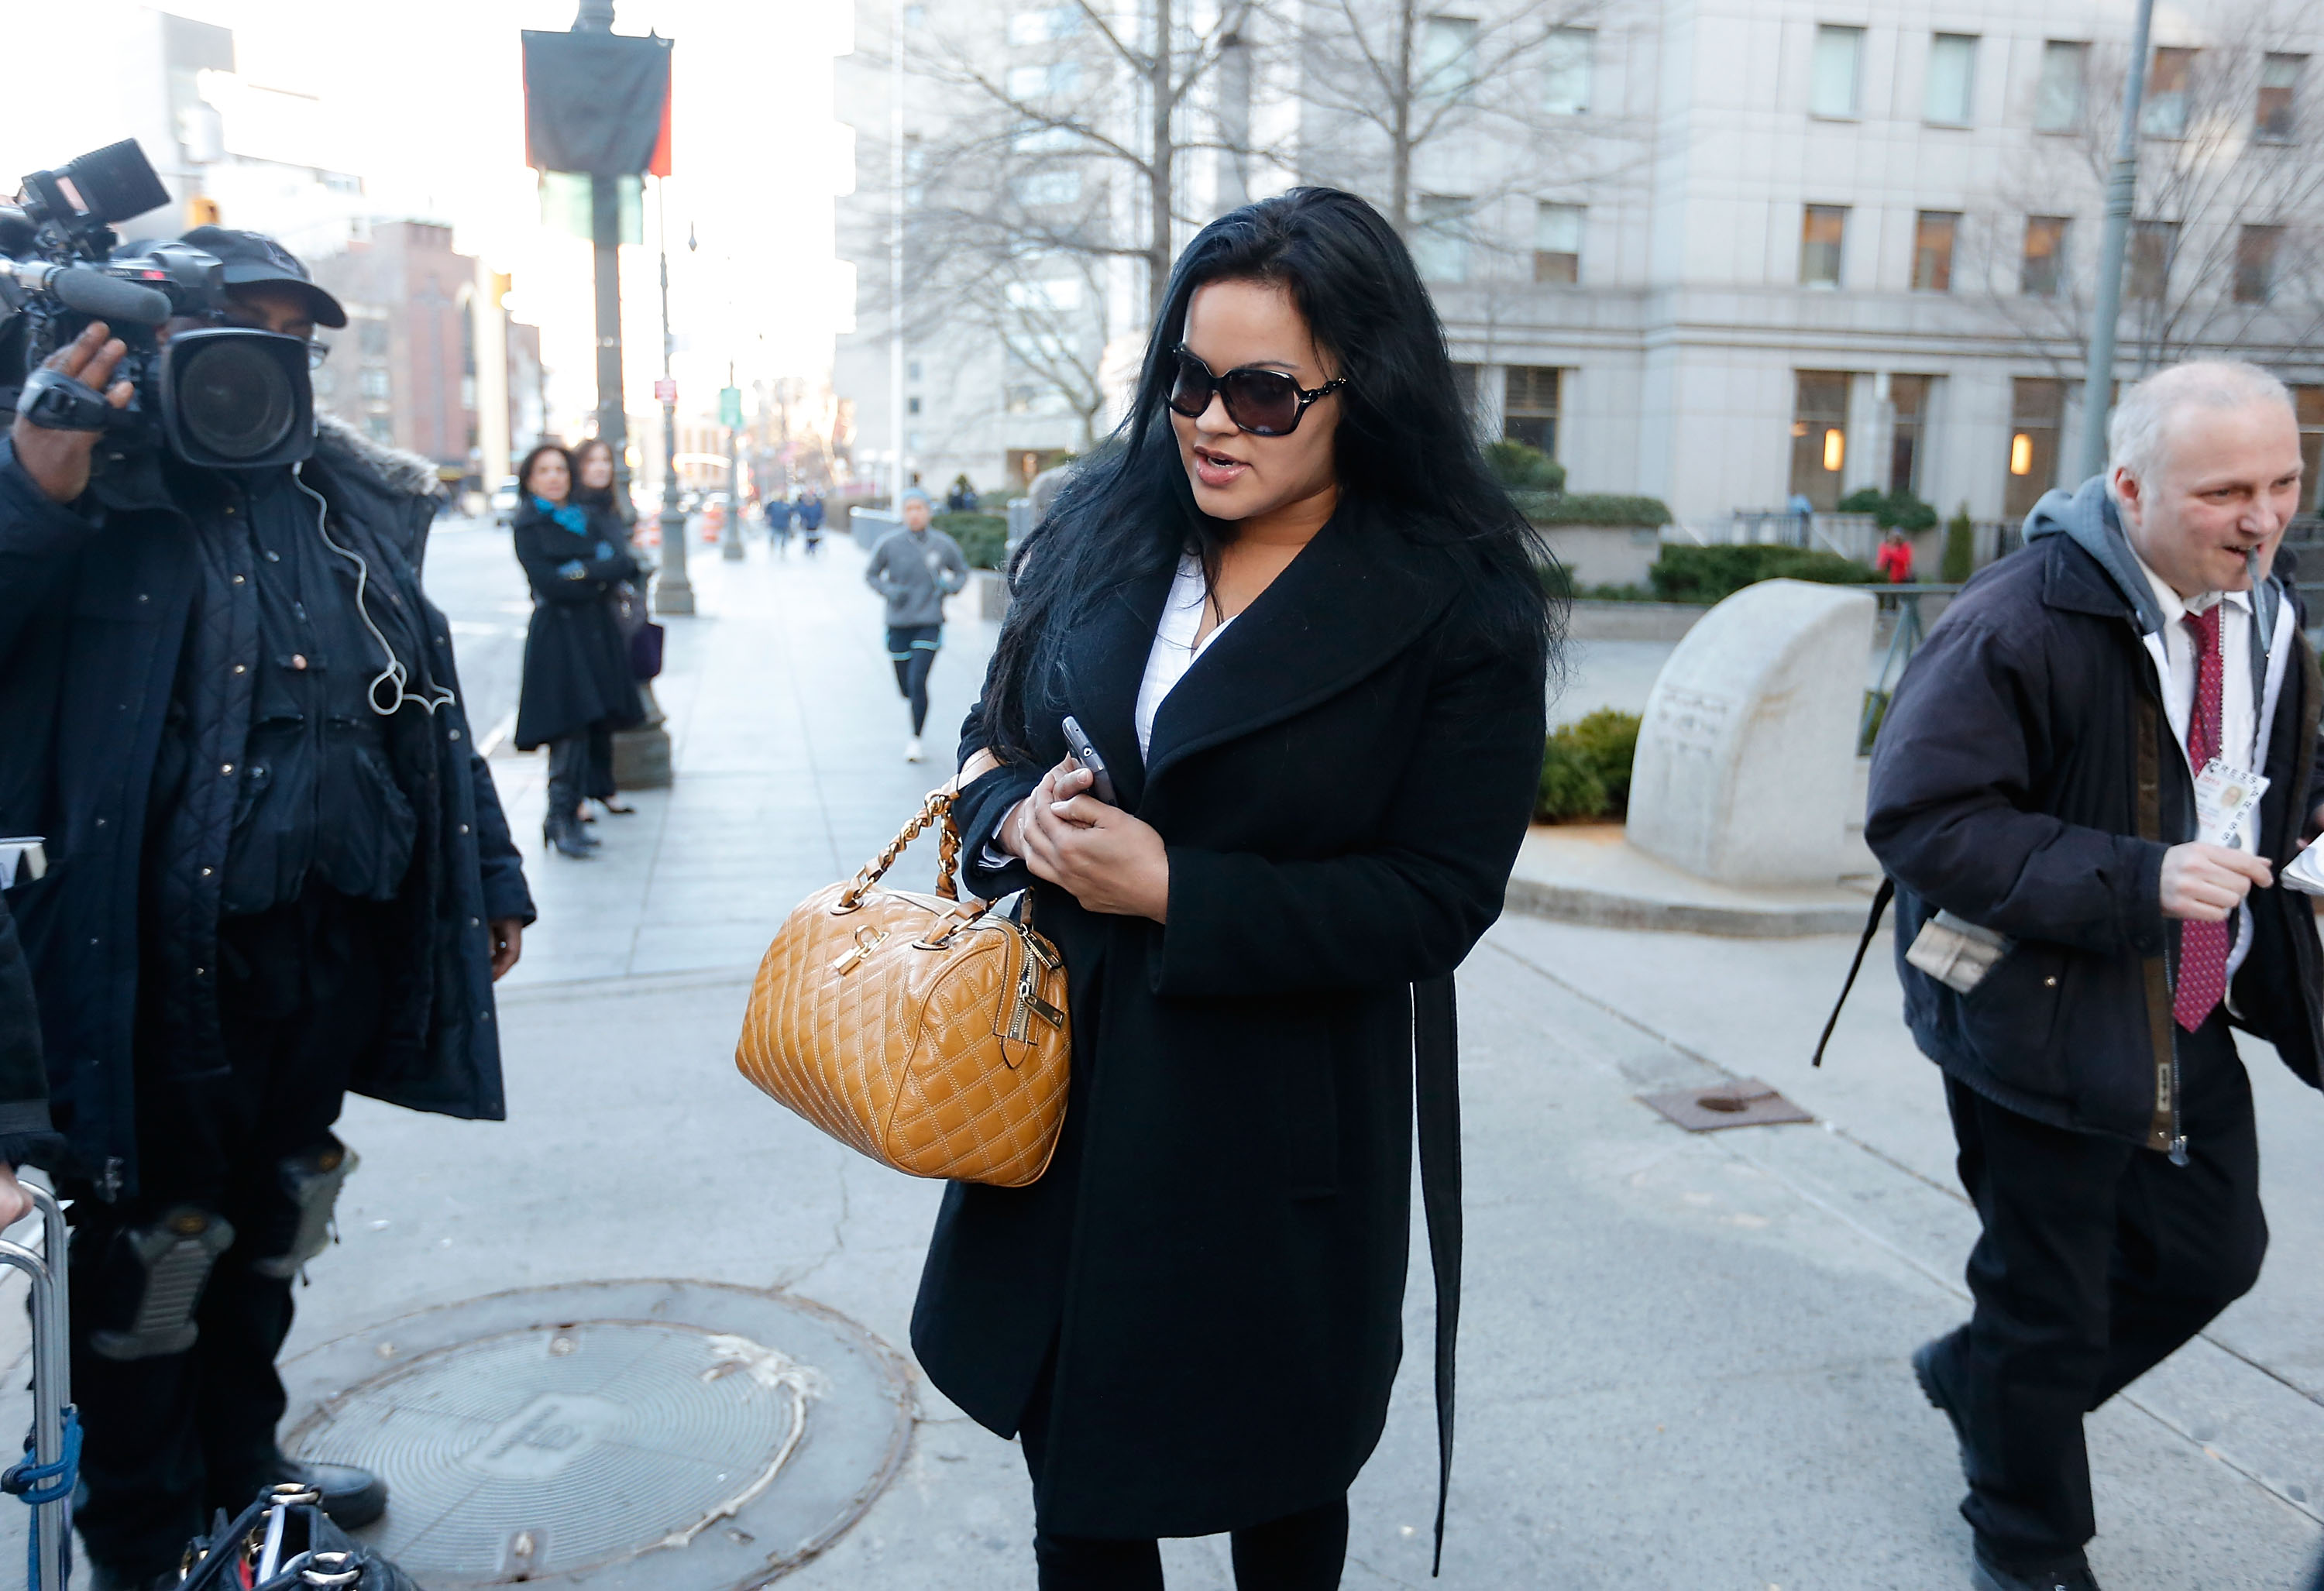 Liza Morales departs New York Supreme court after a custody hearing with ex-boyfriend NBA player Lamar Odom at New York State Supreme Court, on March 5, 2013, in New York City. | Source: Getty Images